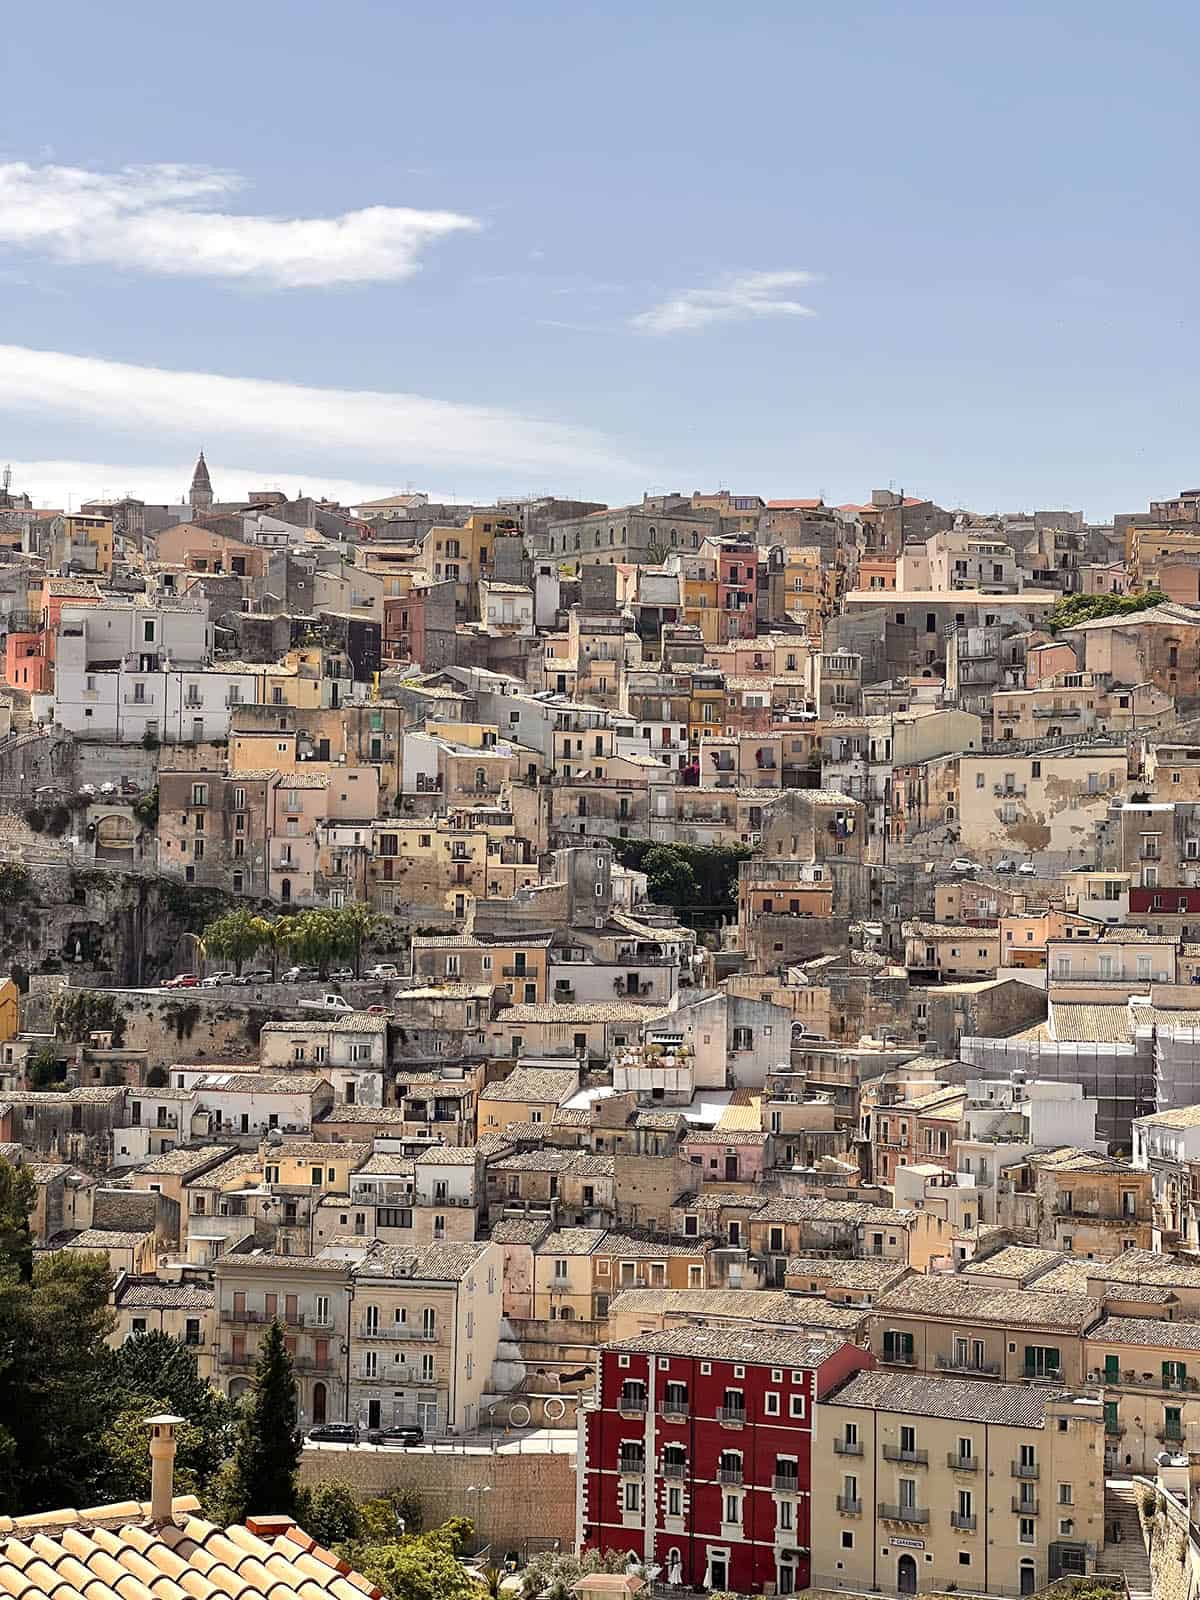 An image of the view of the cliffside houses of Ragusa as viewed from Ragusa Ibla